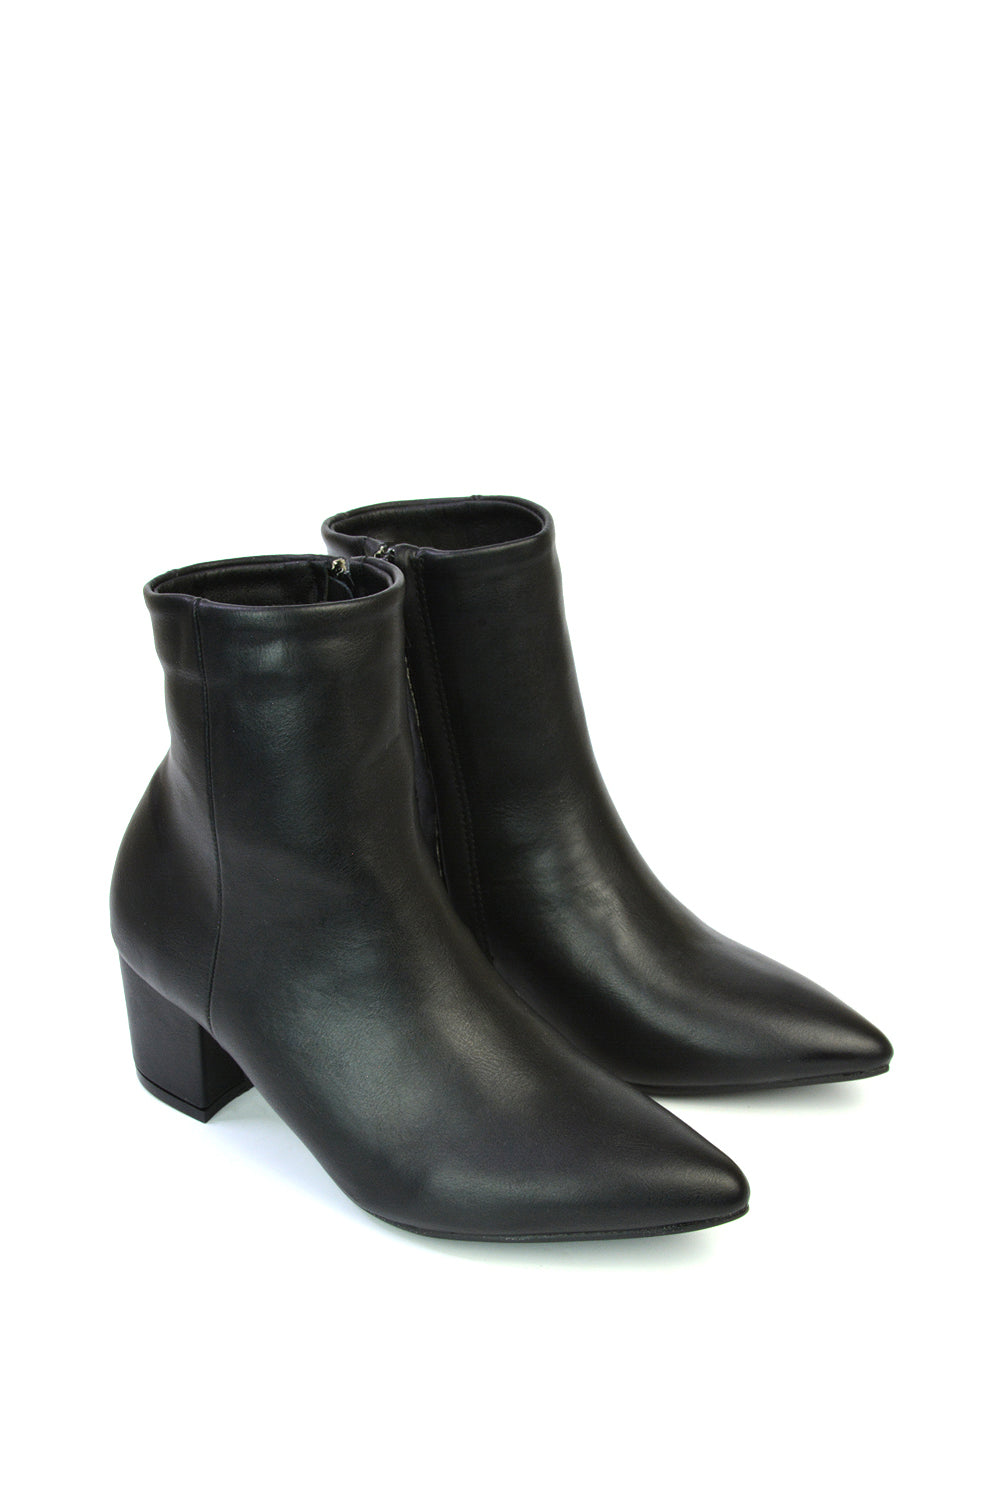 Ayda Pointed Toe inside Zip Detail Low Block Heel Ankle Boots in Black Synthetic Leather